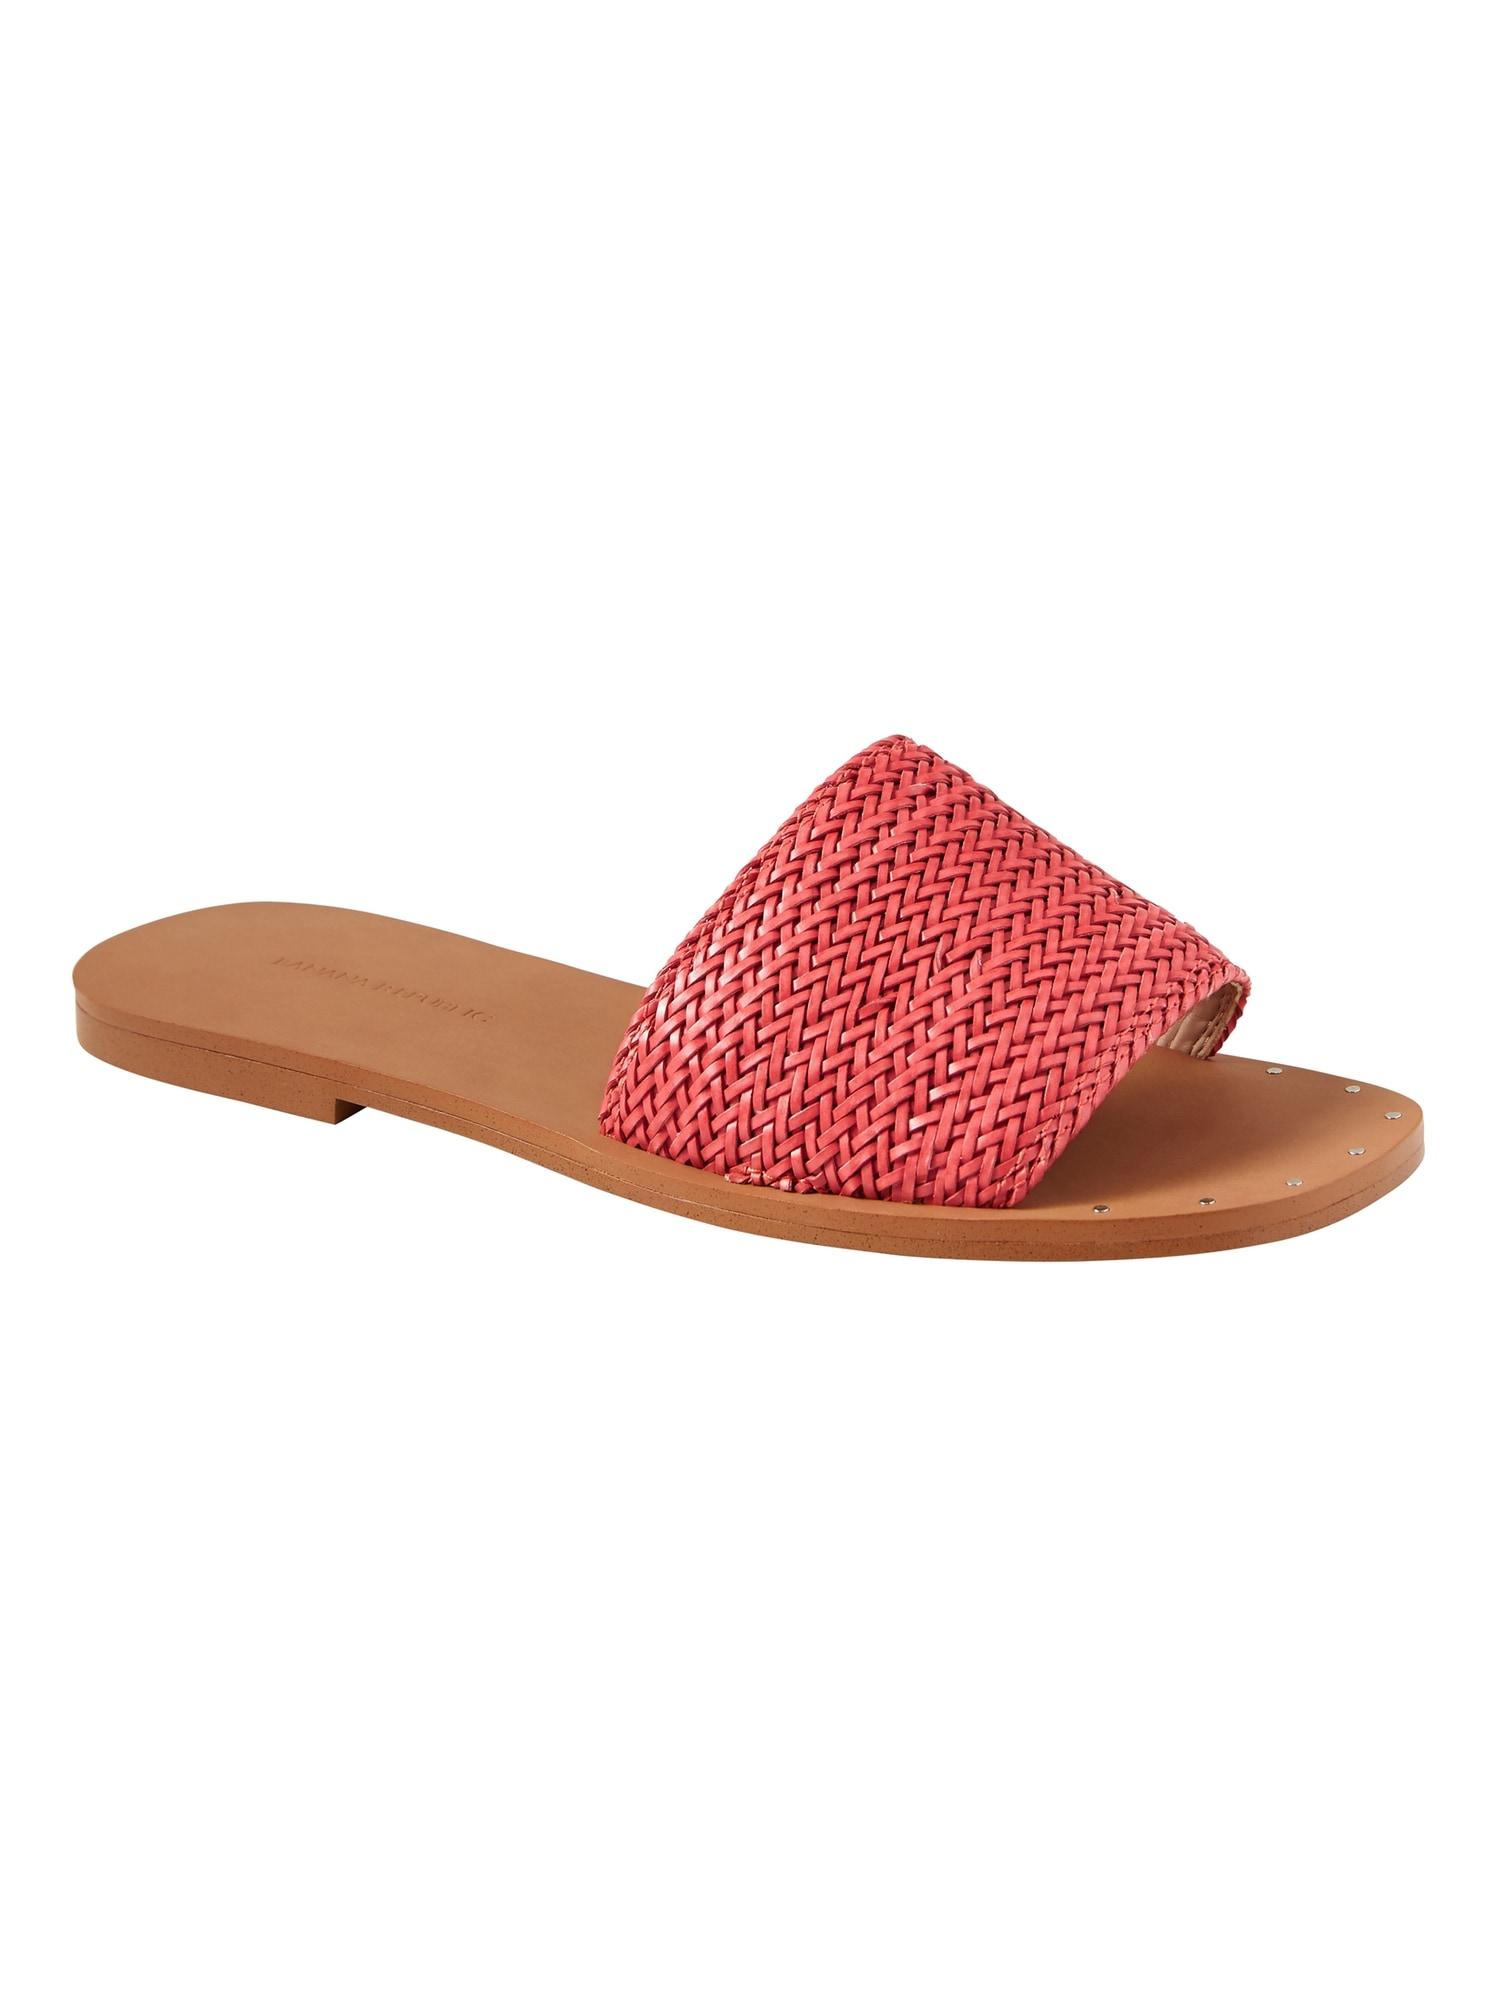 Banana Republic Woven Slide Sandals in Red - Lyst